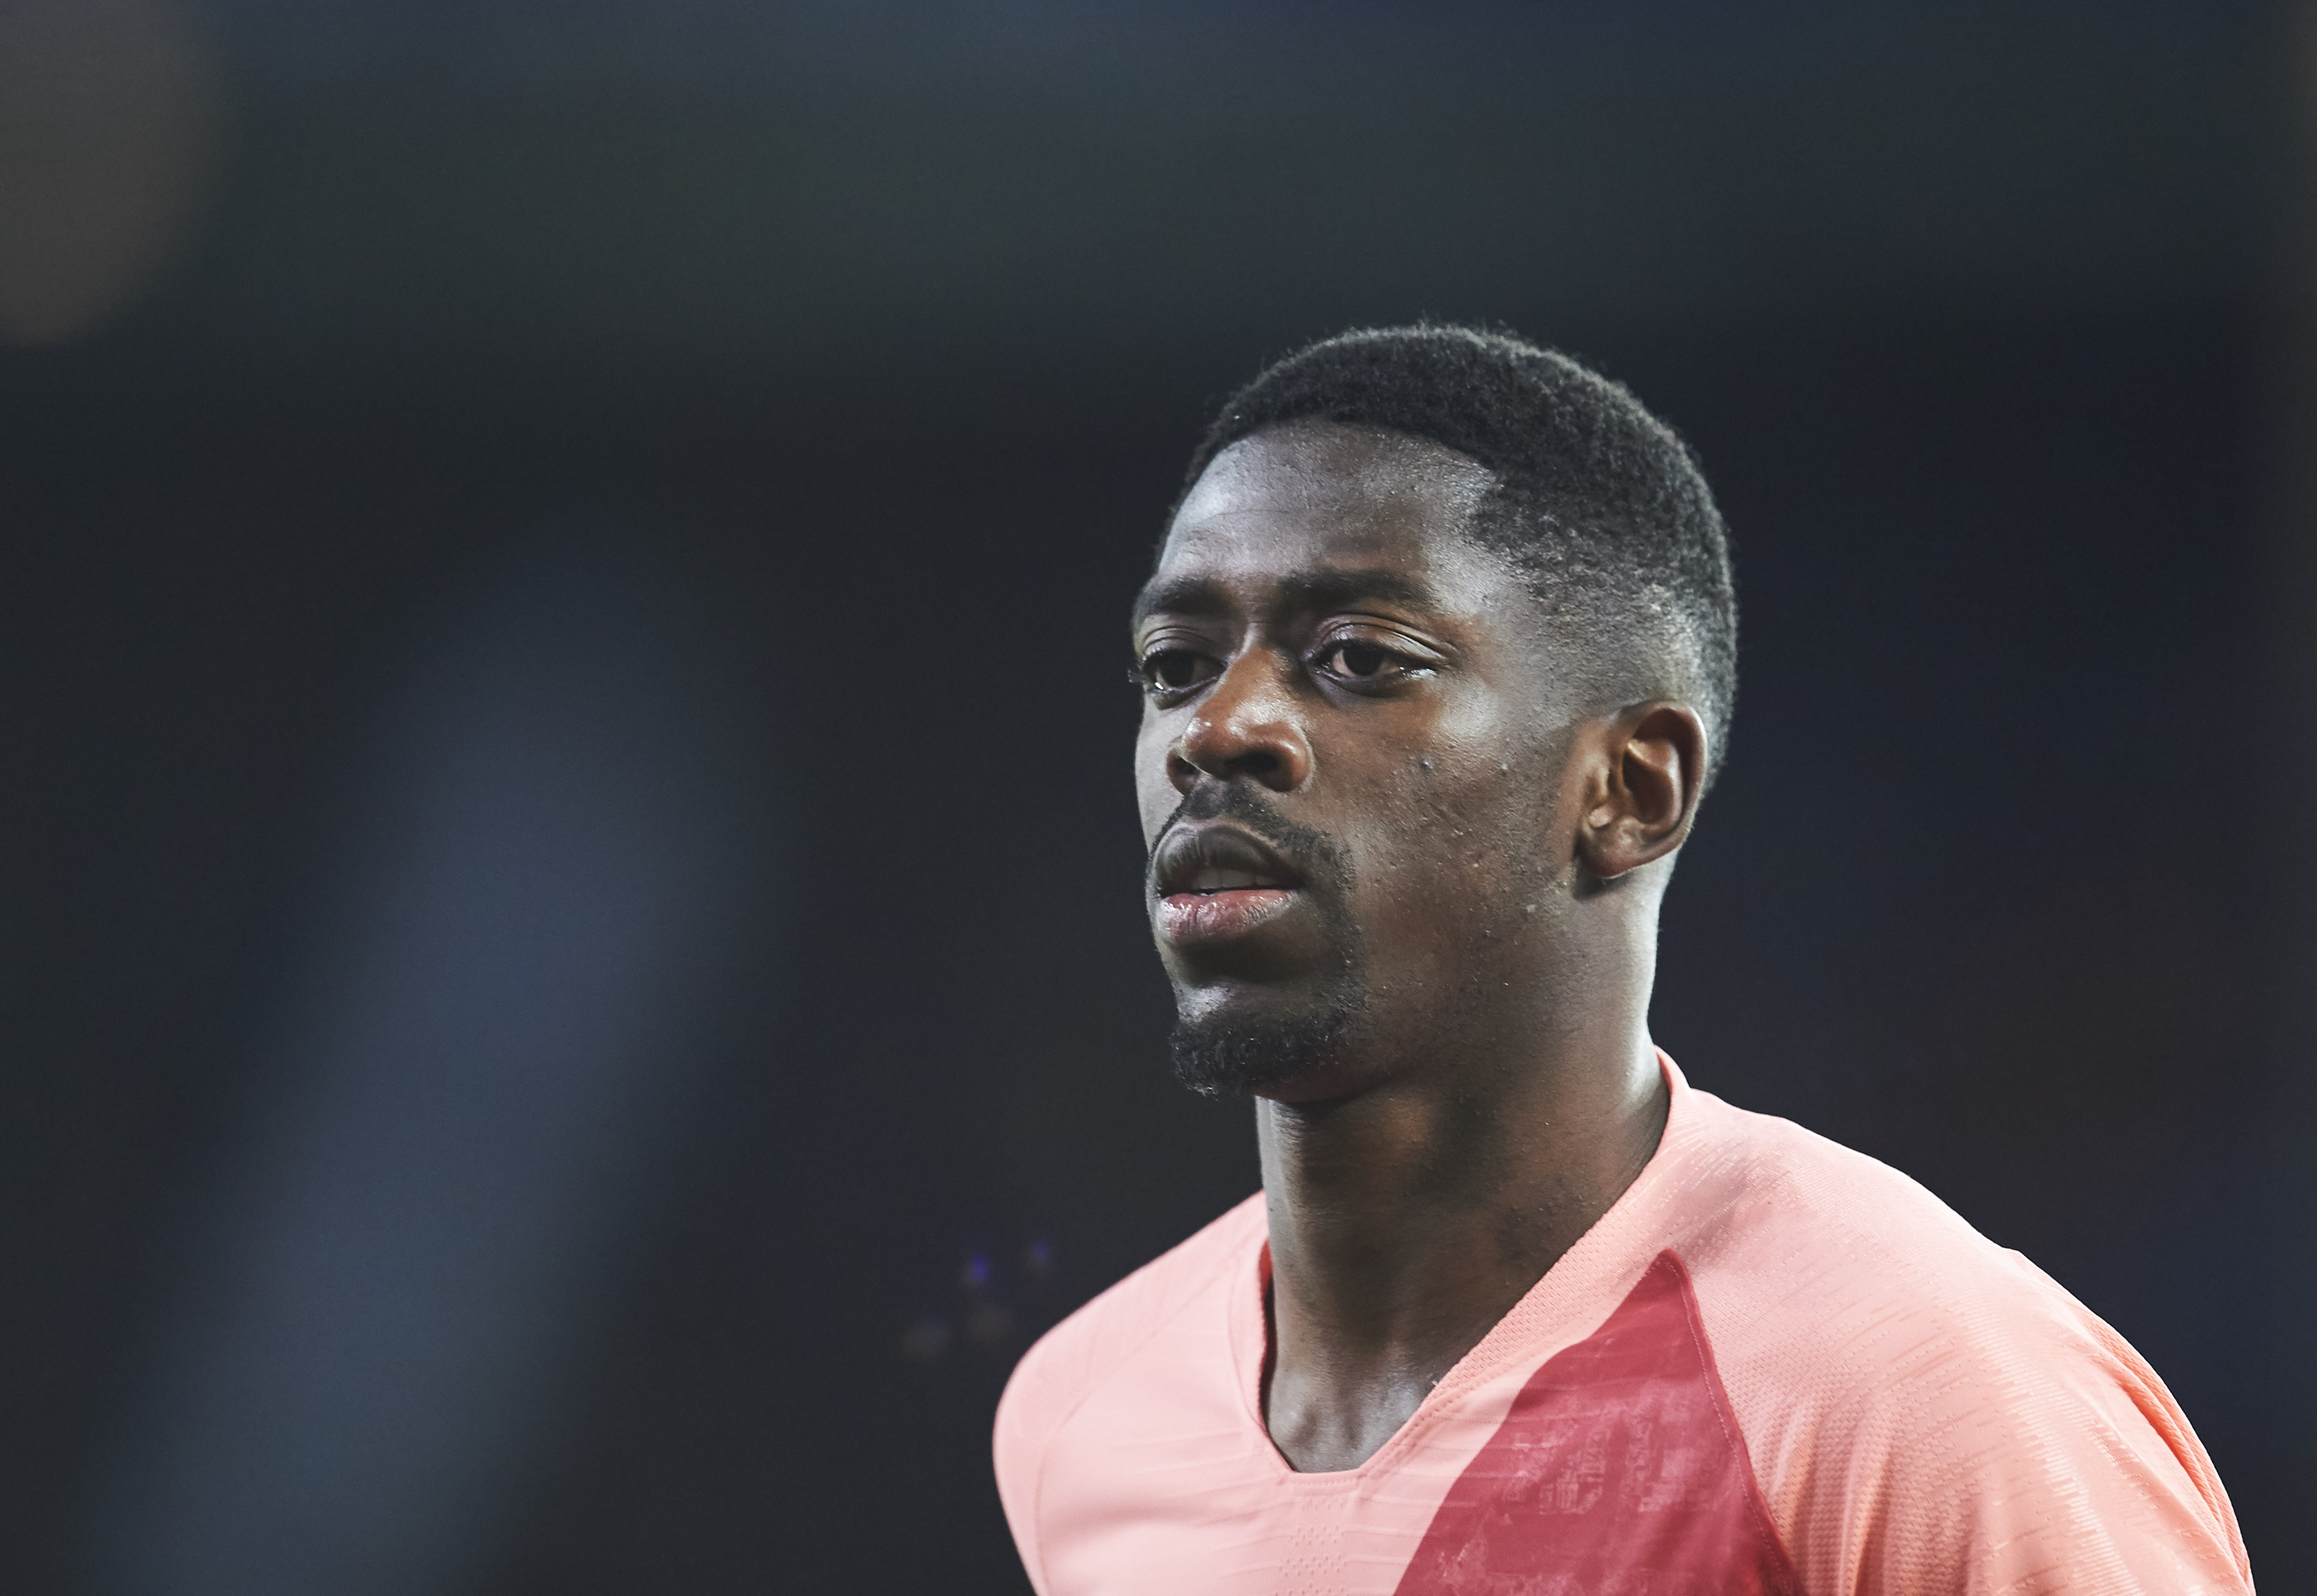 VITORIA-GASTEIZ, SPAIN - APRIL 23: Ousmane Dembele of FC Barcelona reacts during the La Liga match between Deportivo Alaves and FC Barcelona at Estadio de Mendizorroza on April 23, 2019 in Vitoria-Gasteiz, Spain. (Photo by Juan Manuel Serrano Arce/Getty Images)